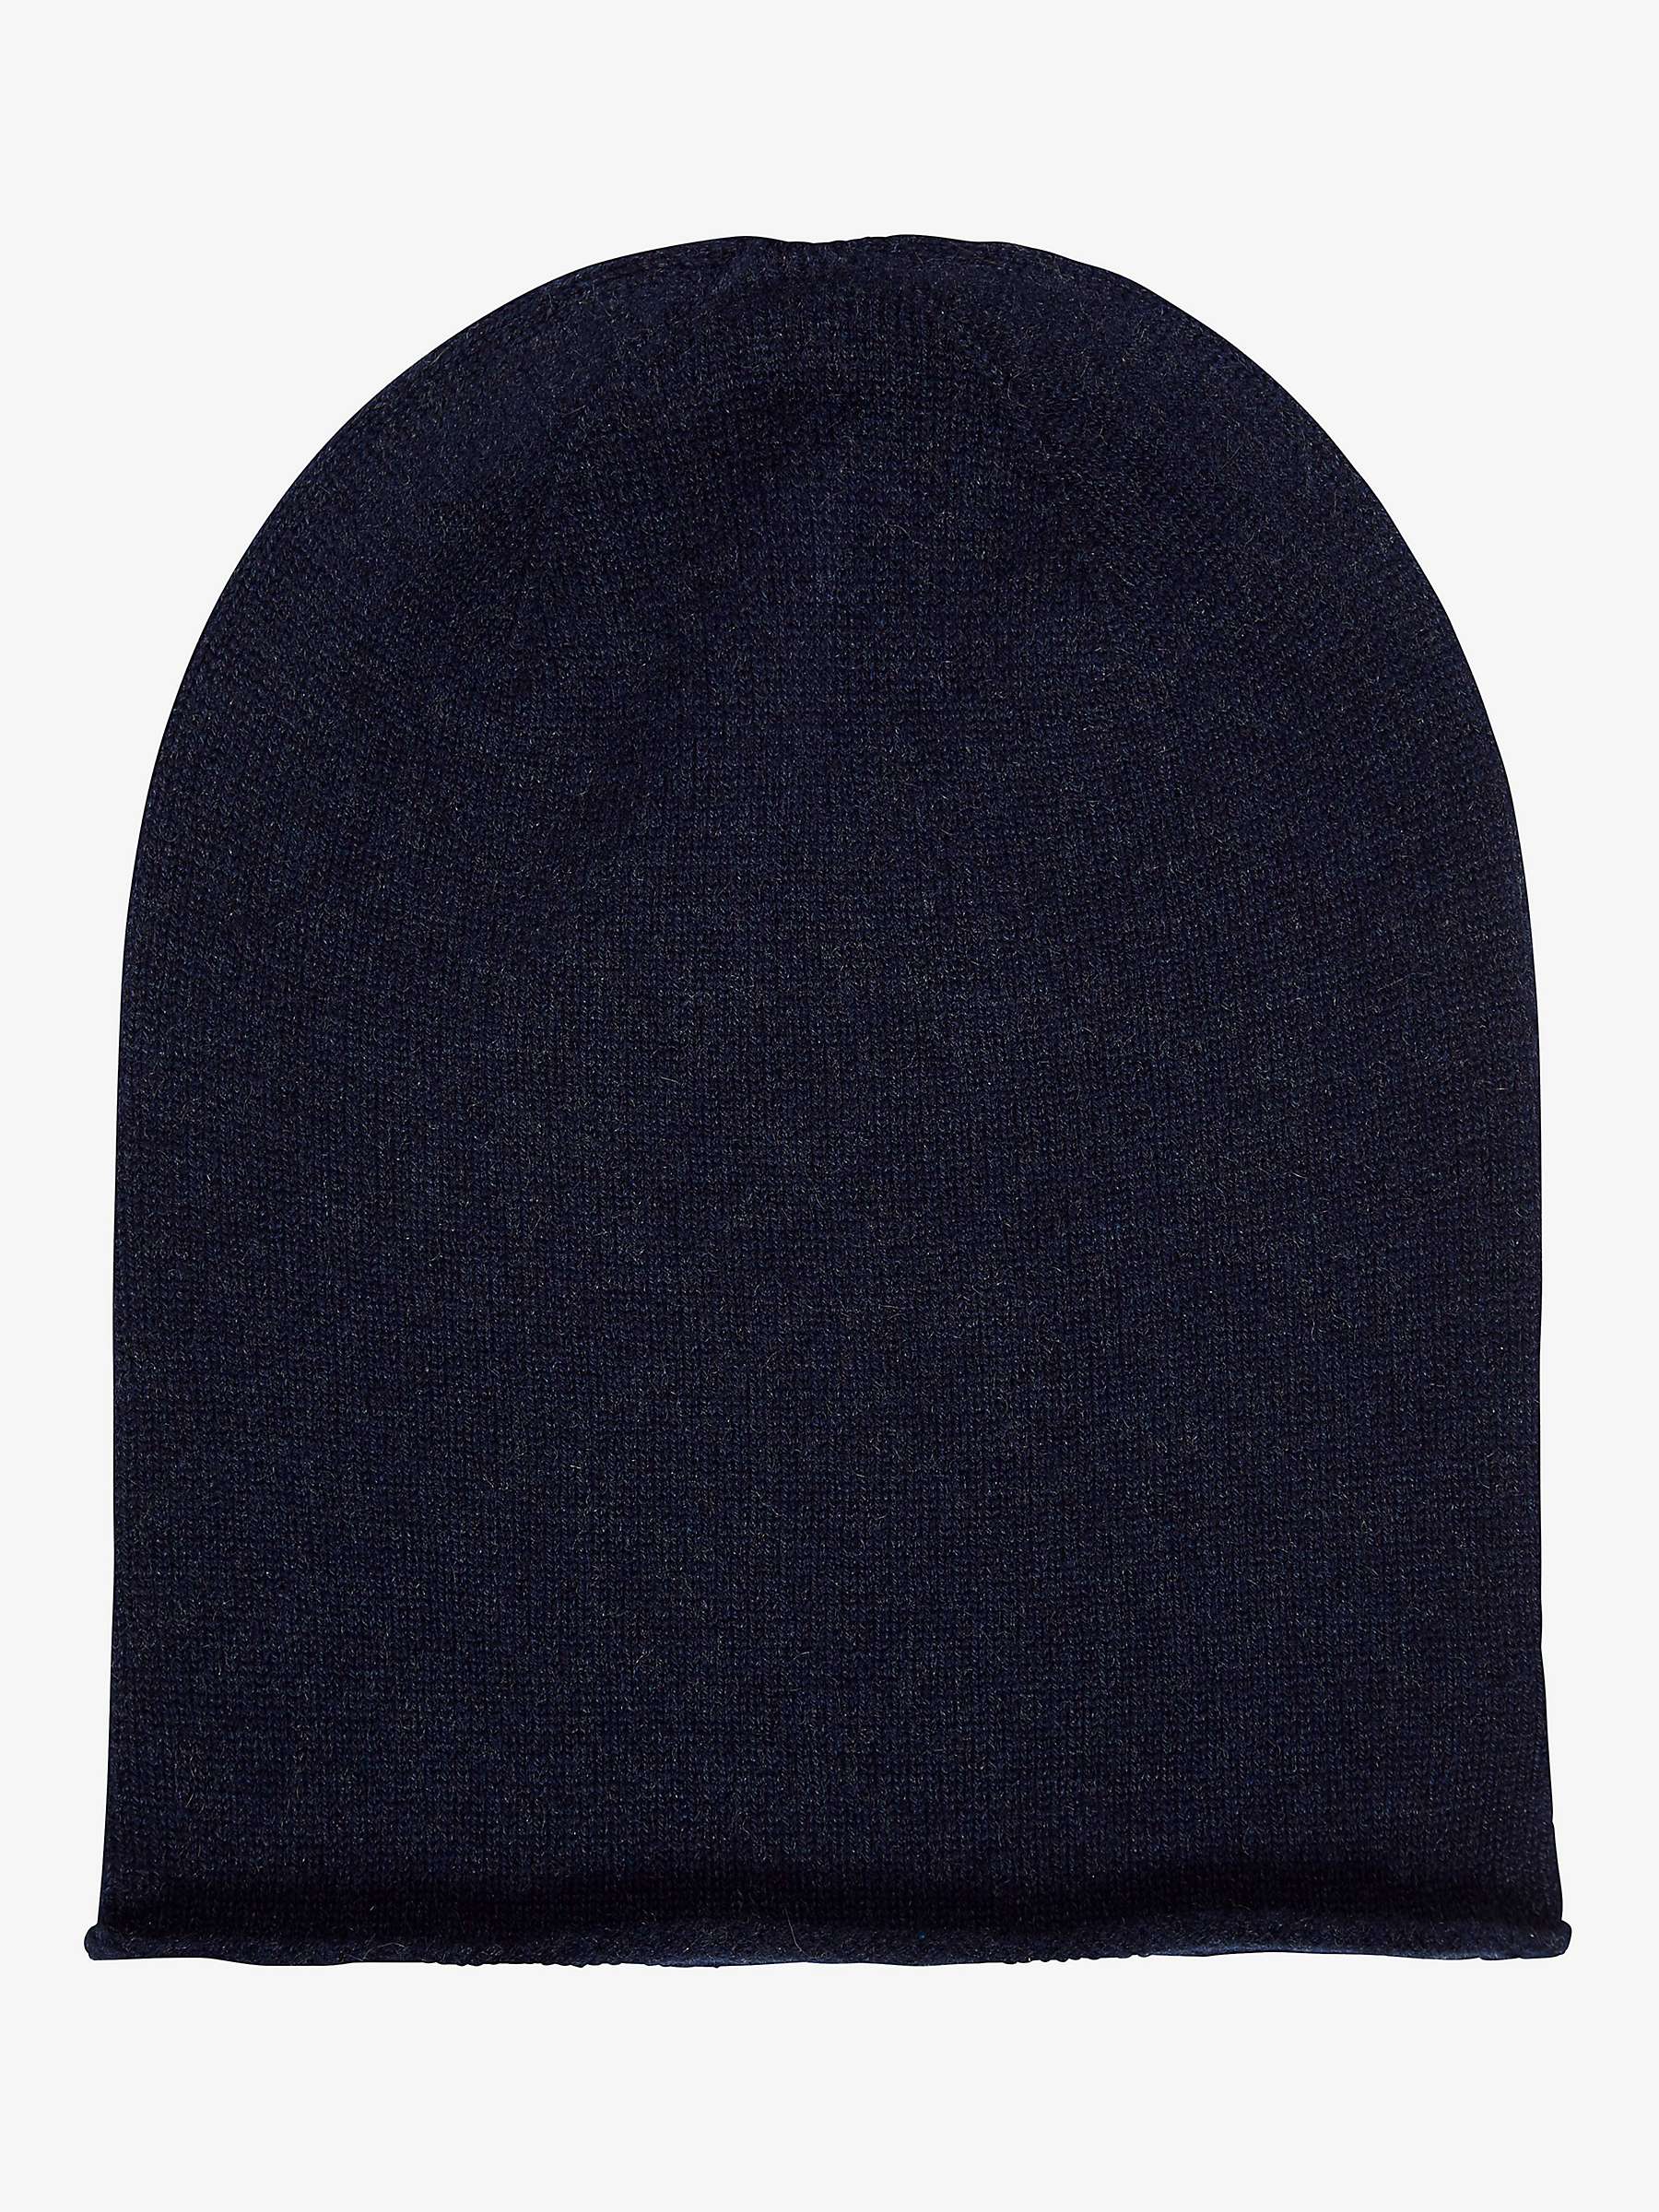 Buy Brora Cashmere Slouchy Beanie Hat Online at johnlewis.com